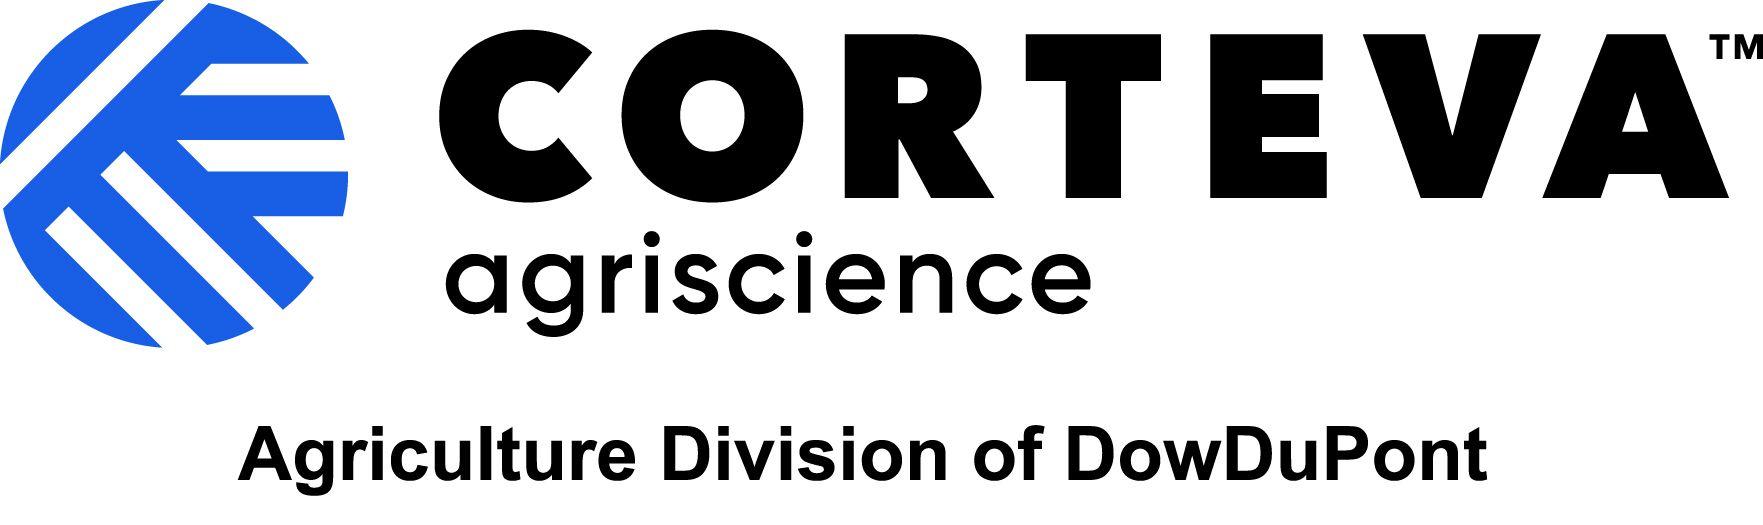 Monsanto Oval Logo - Corteva Agriscience™, Agriculture Division of DowDuPont